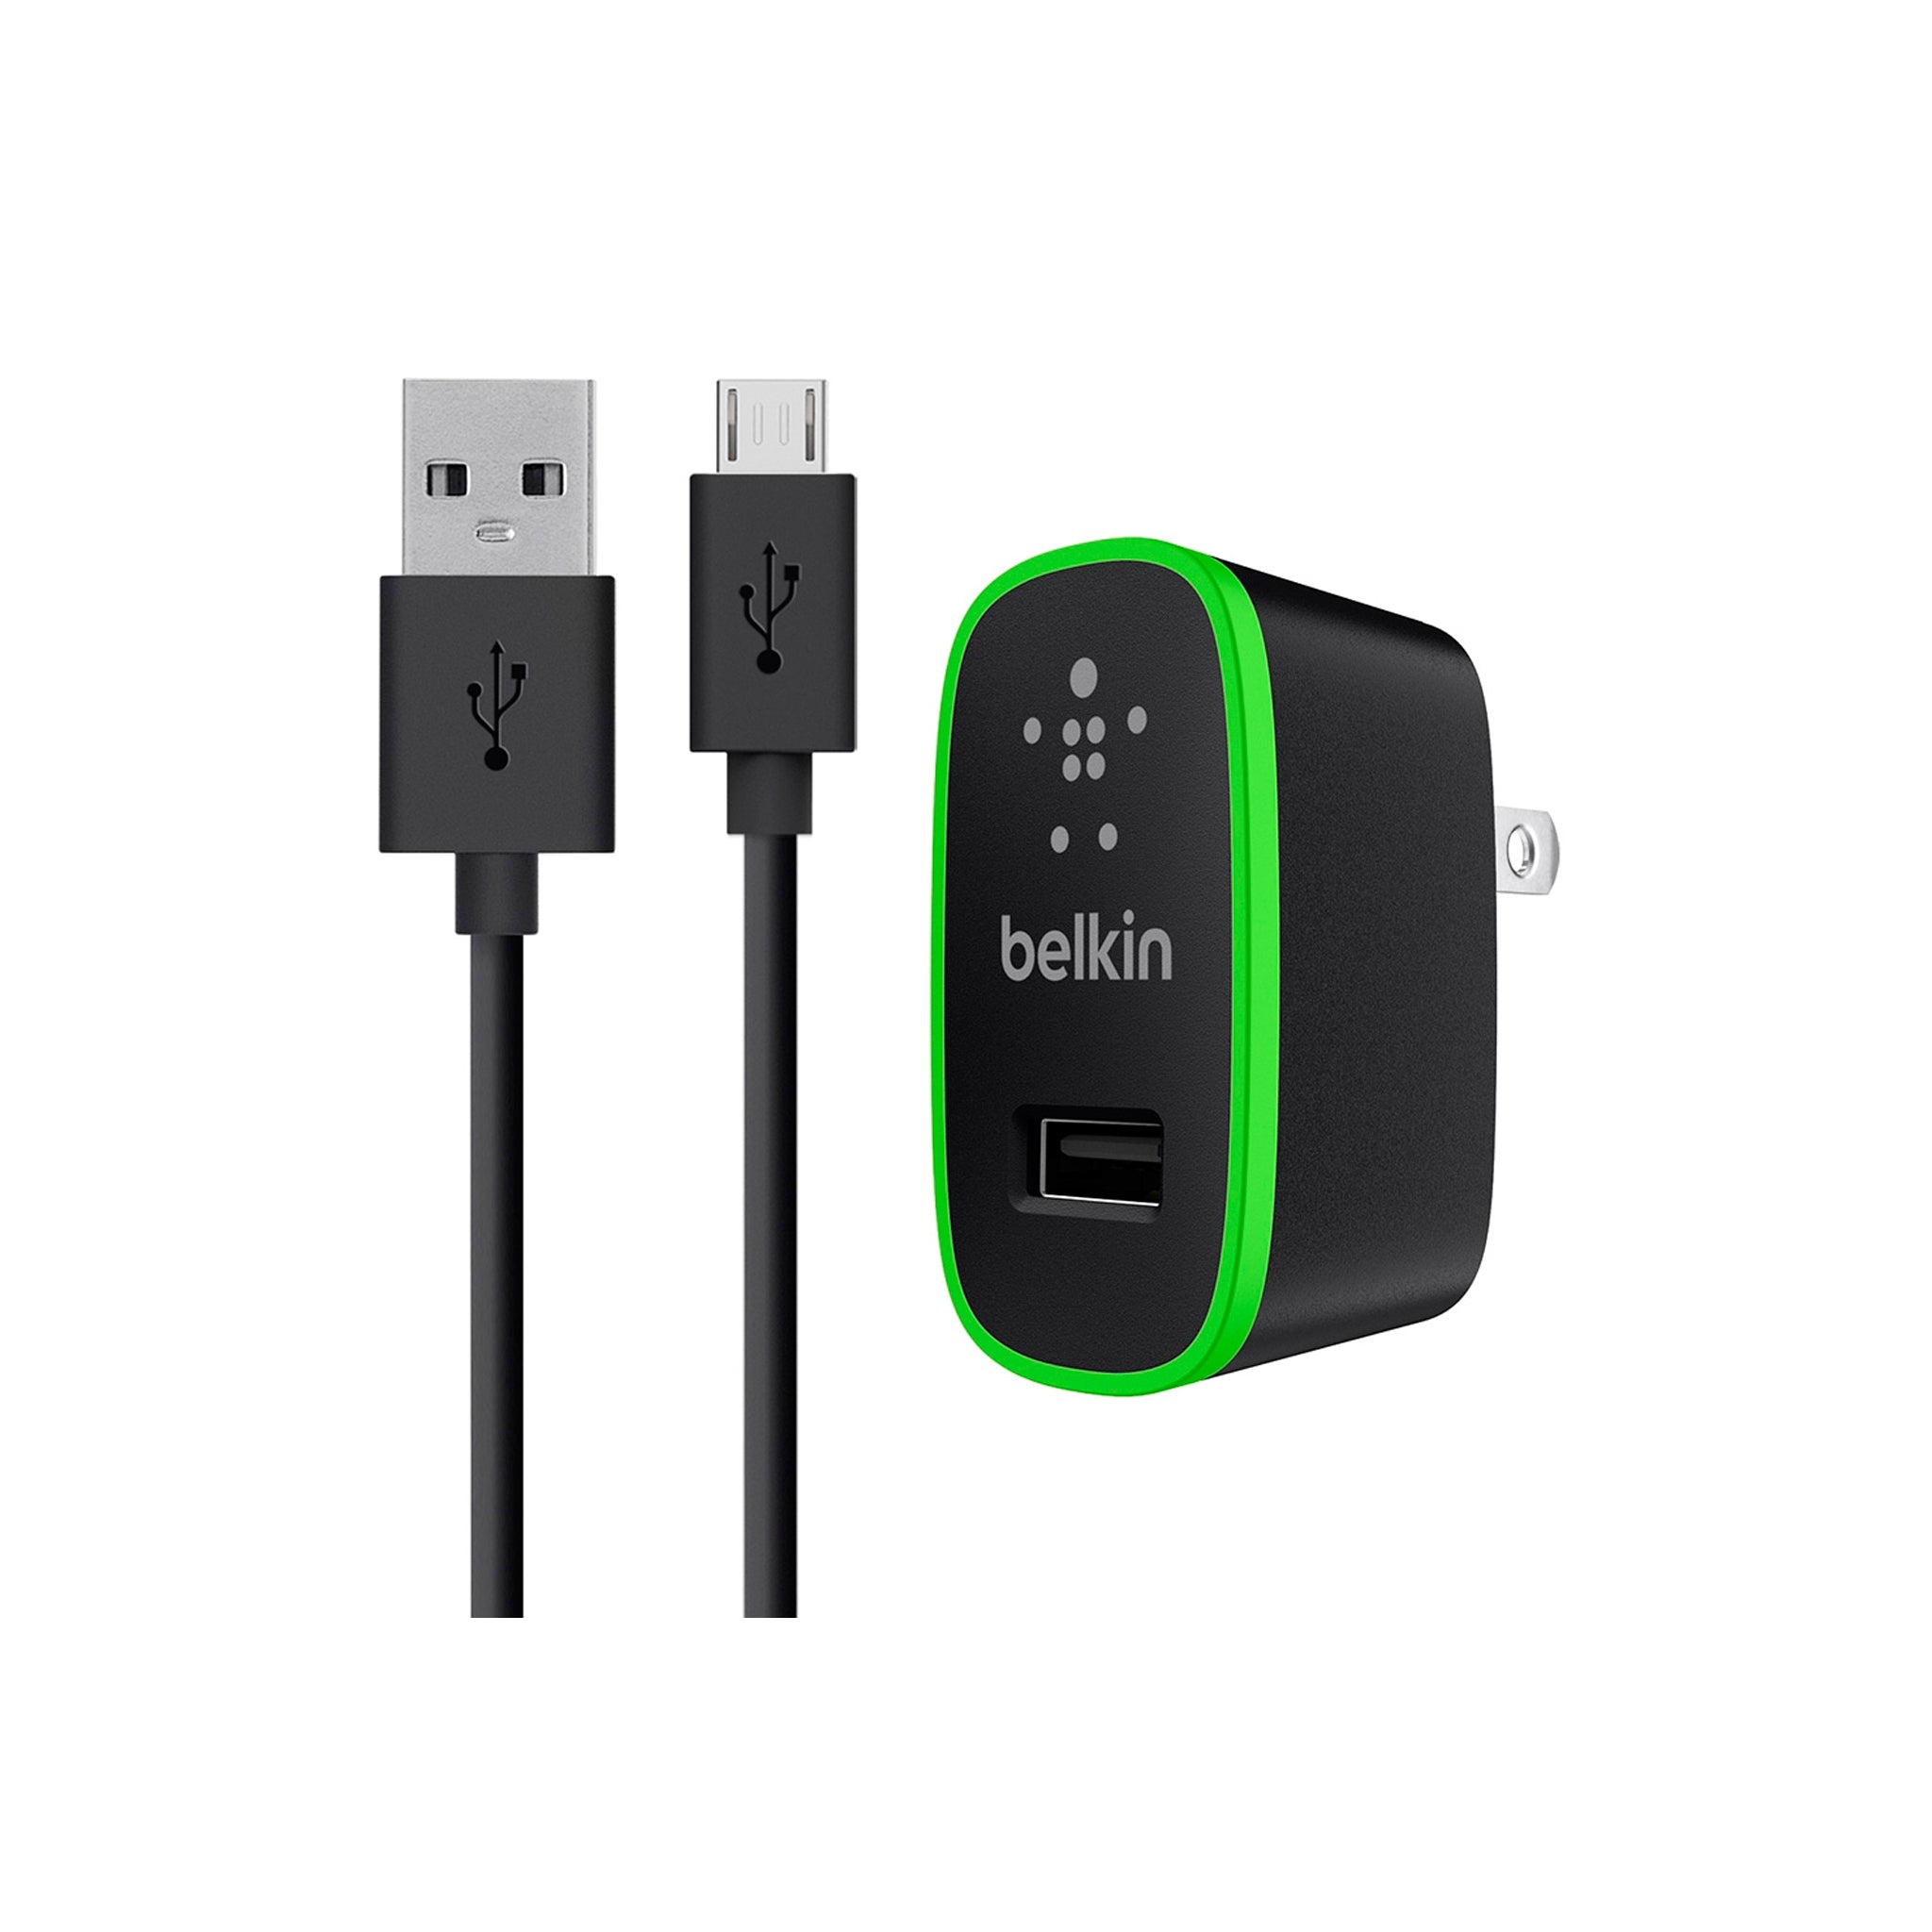 Belkin - Wall Charger 2.4a For Micro Usb Devices - Black And Green